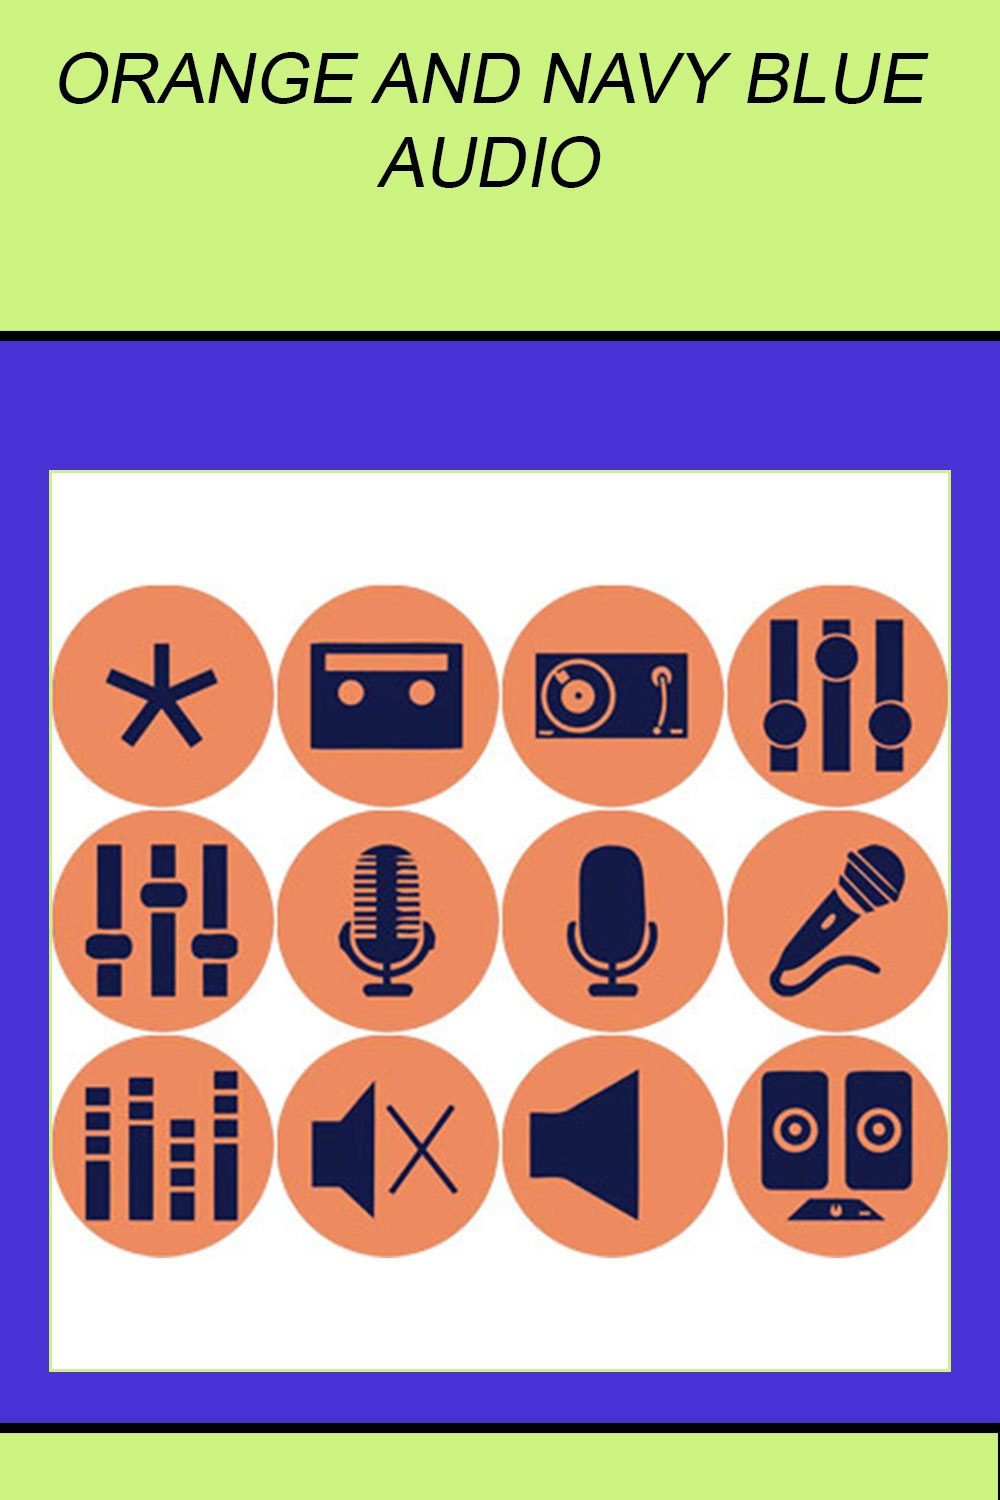 ORANGE AND NAVY BLUE AUDIO ROUND ICONS pinterest preview image.